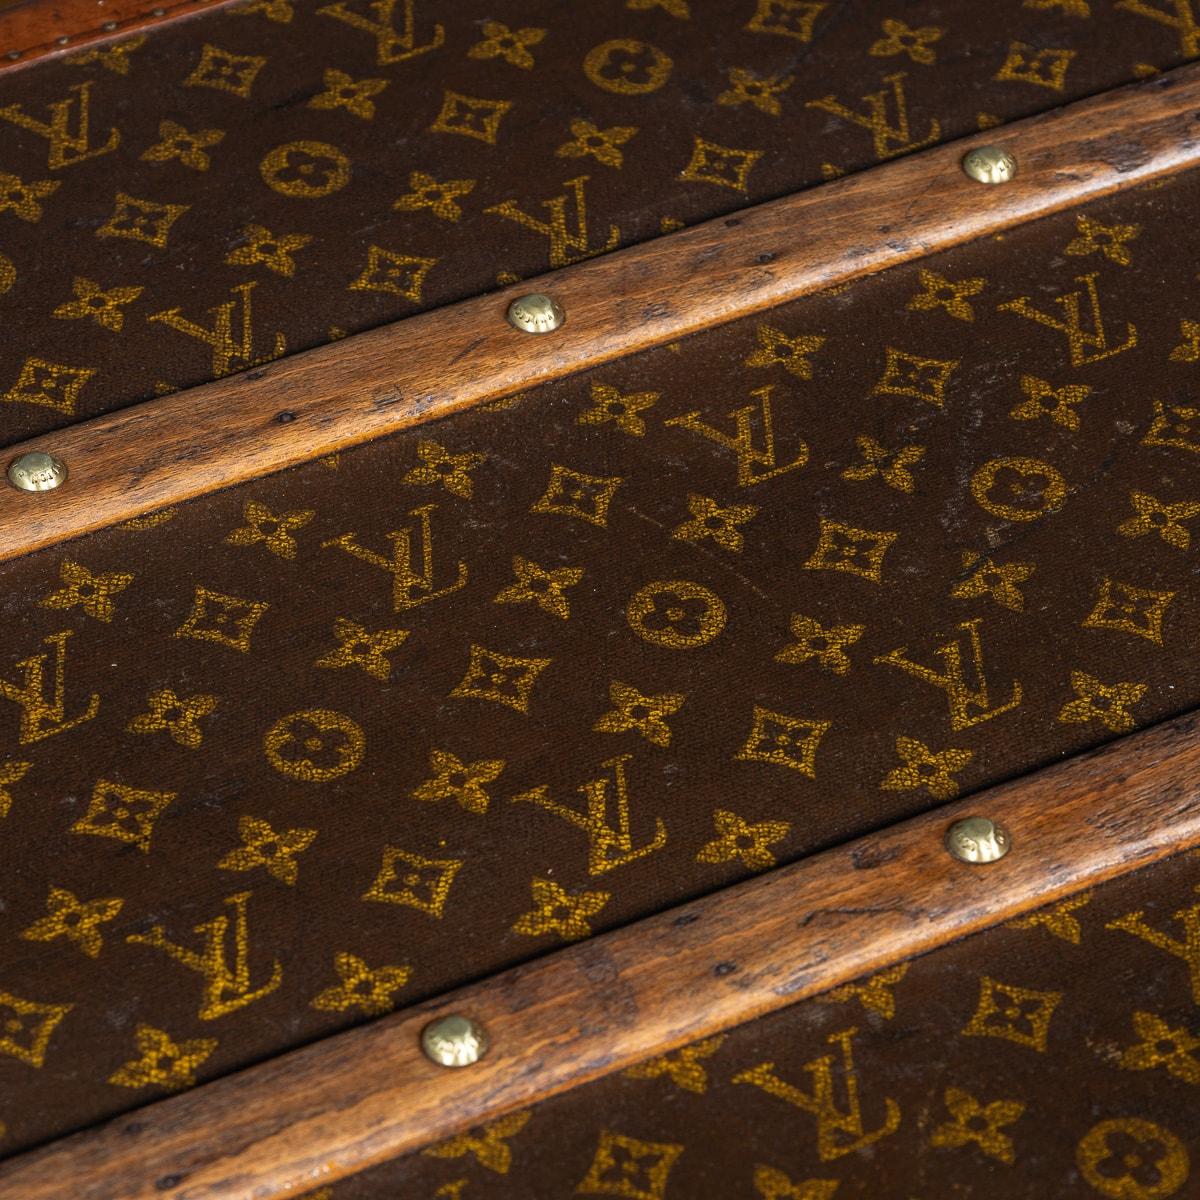 20th Century Louis Vuitton Cabin Trunk In Monogram Canvas, France c.1930 For Sale 7